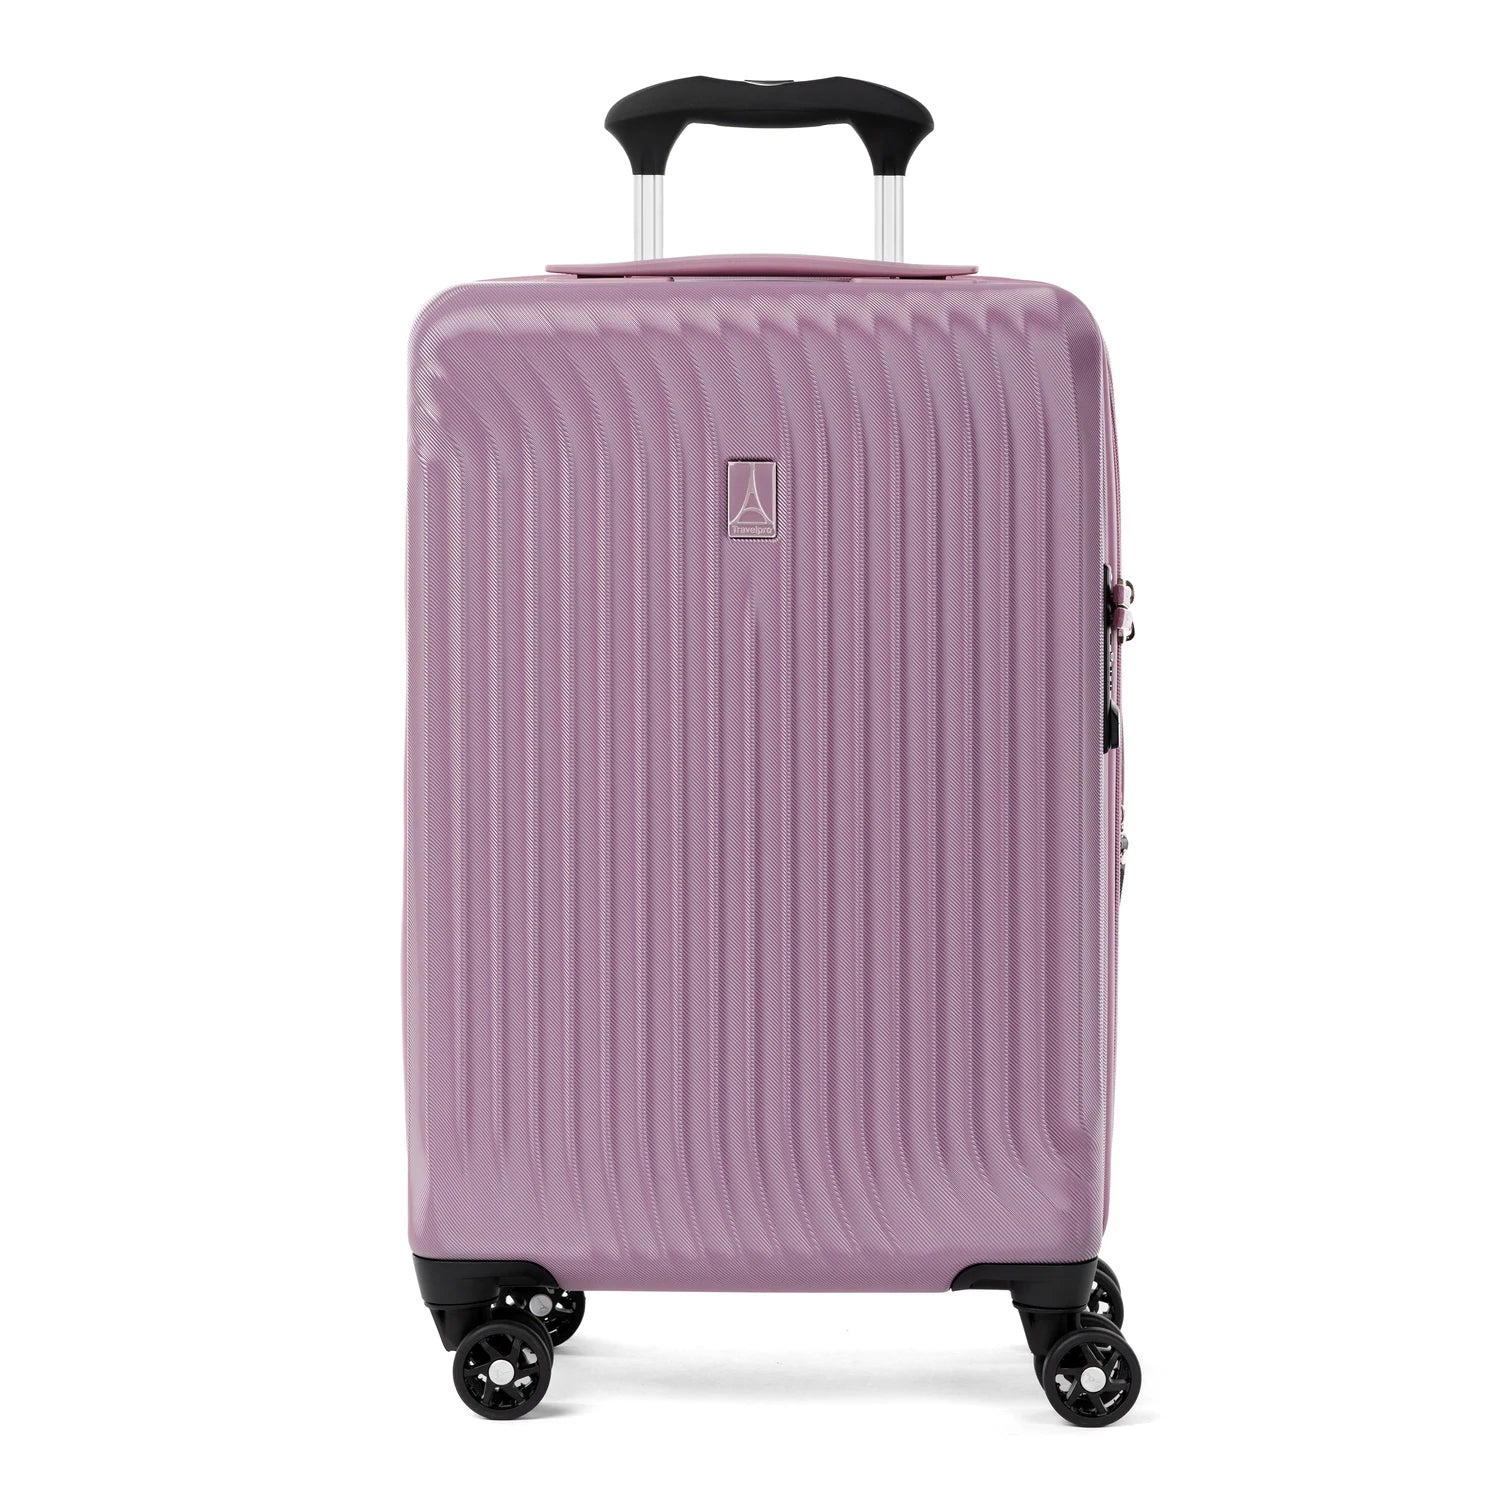 Travelpro Maxlite® Air Carry-On Expandable Hardside Spinner